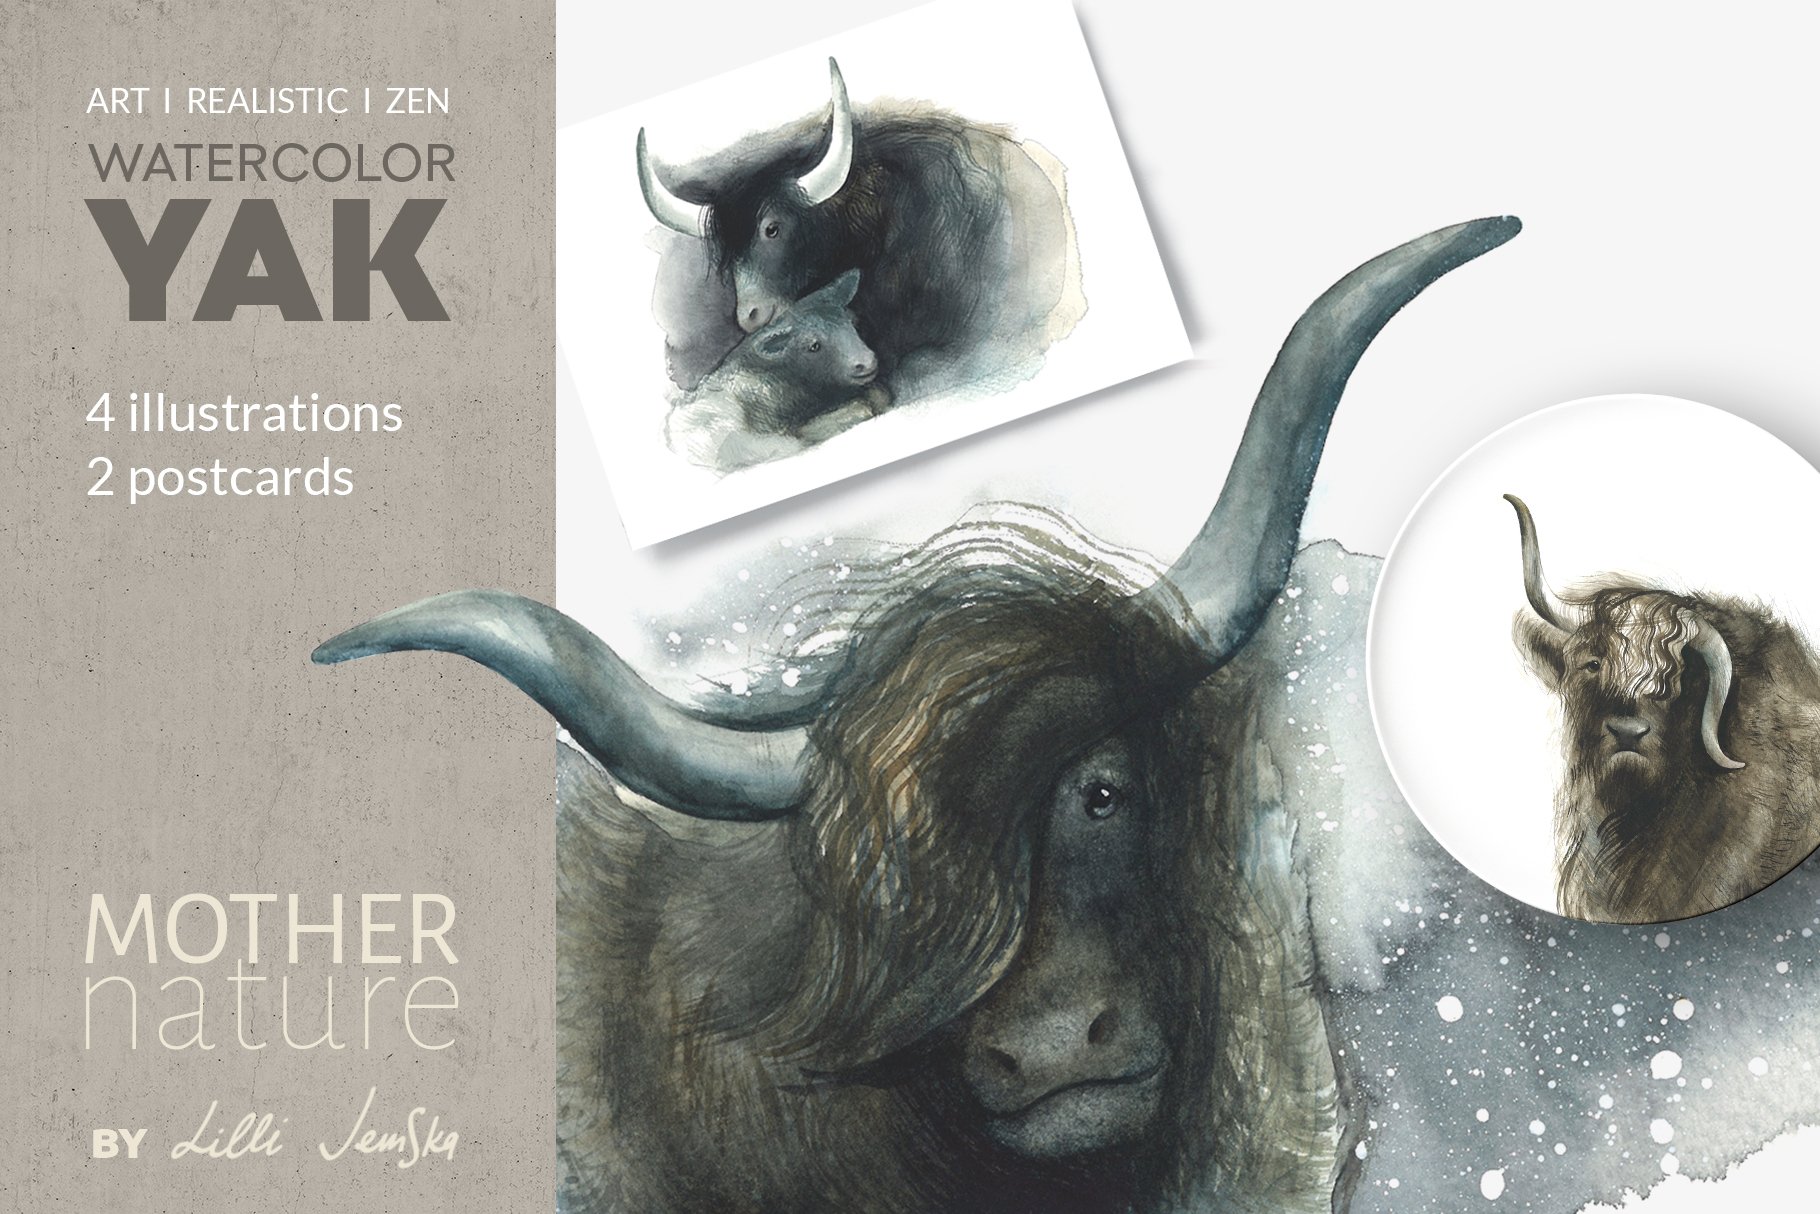 SET OF YAK WATERCOLOR ILLUSTRATIONS cover image.